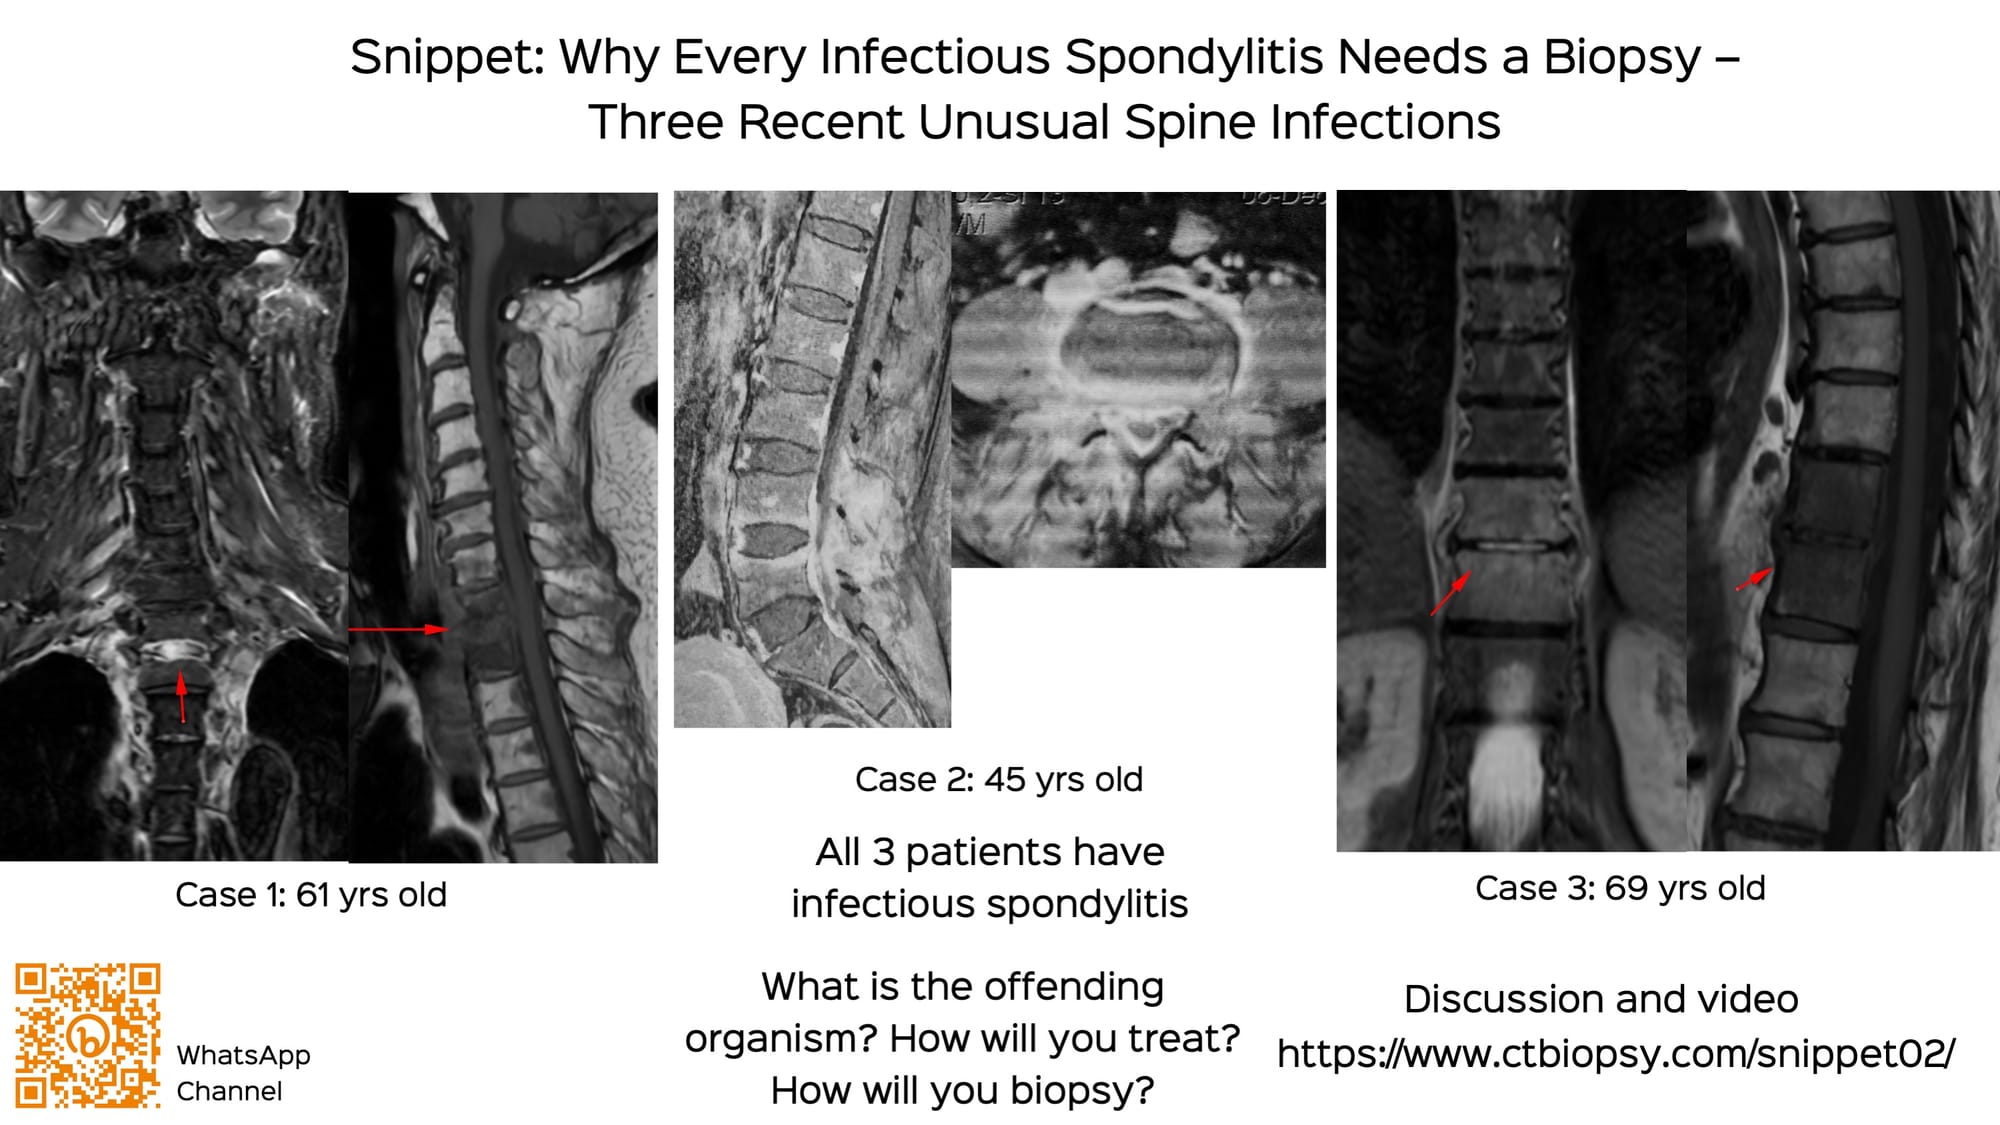 Snippet: Why Every Infectious Spondylitis Needs a Biopsy - Three Recent Unusual Spine Infections